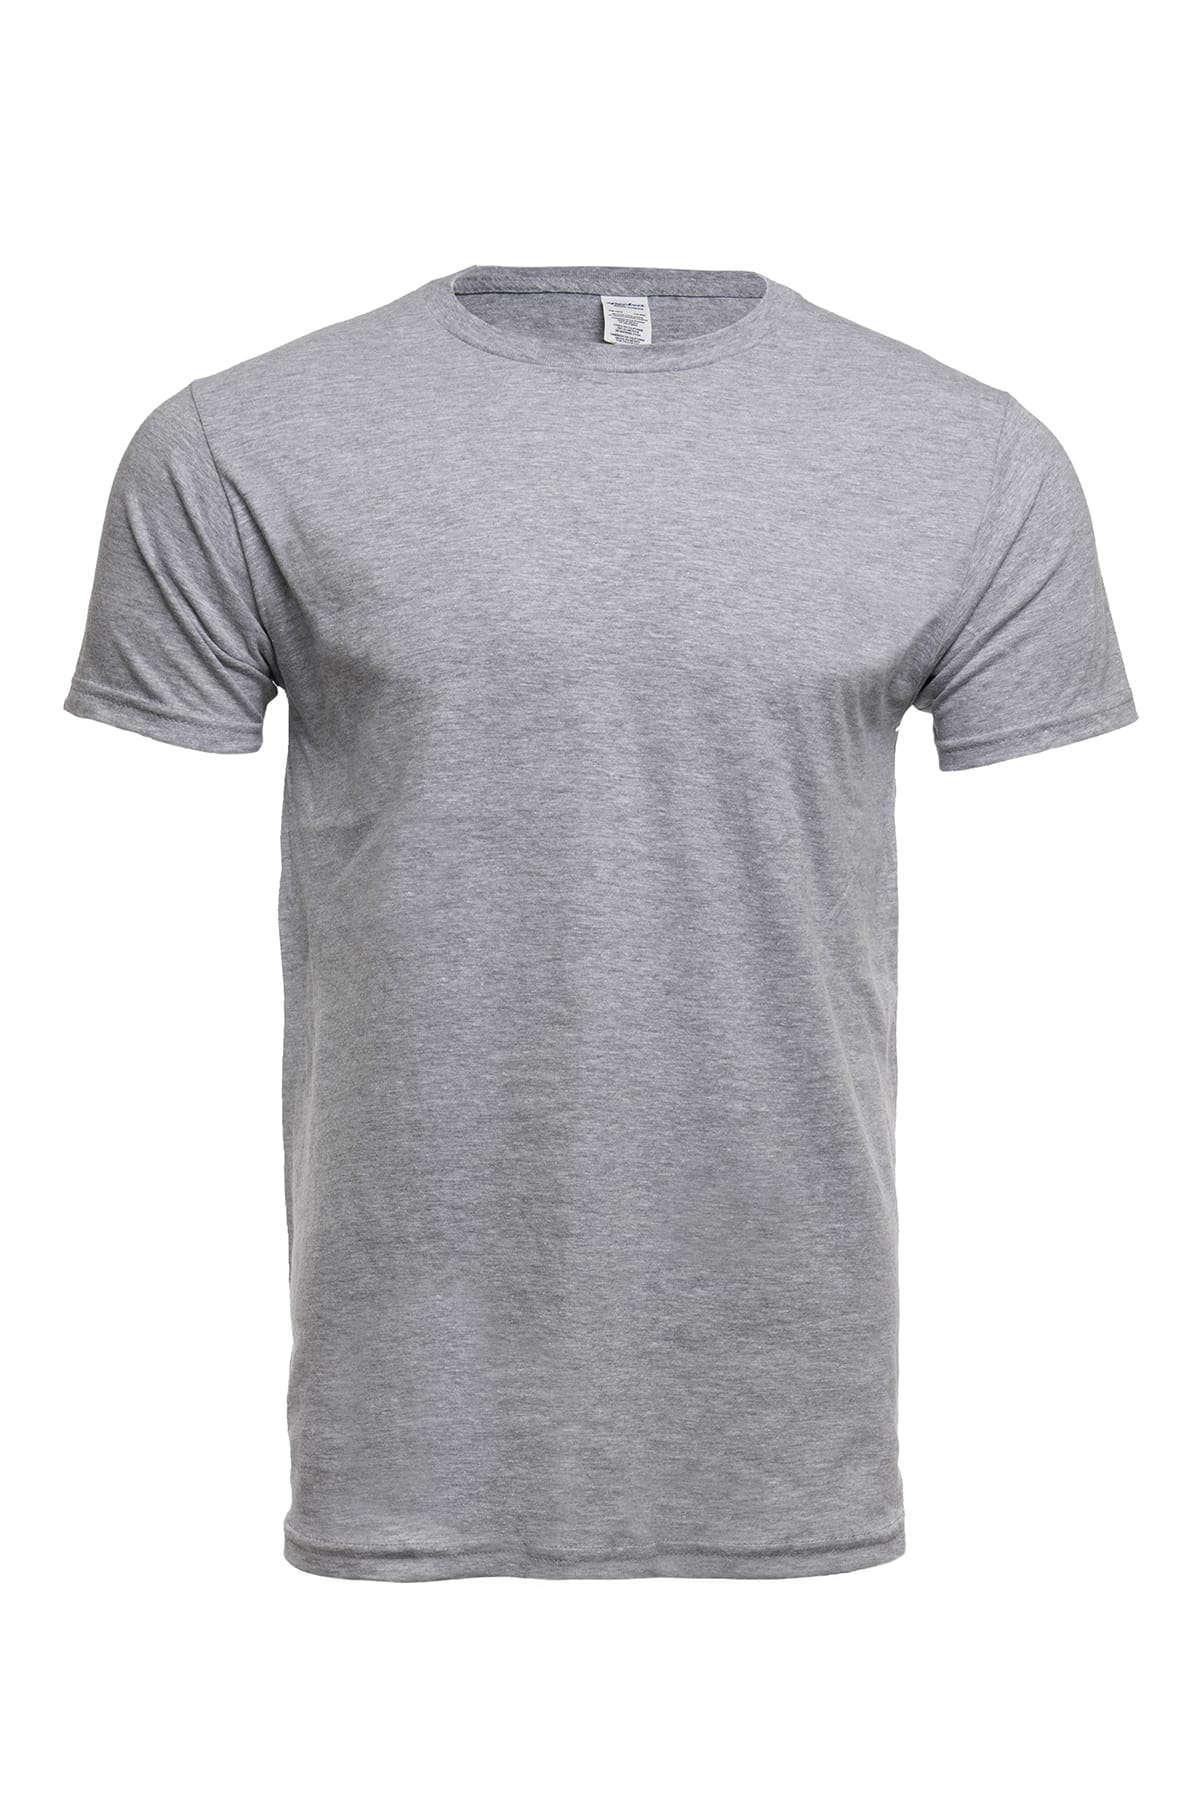 3100 Heather Grey Front T-shirt